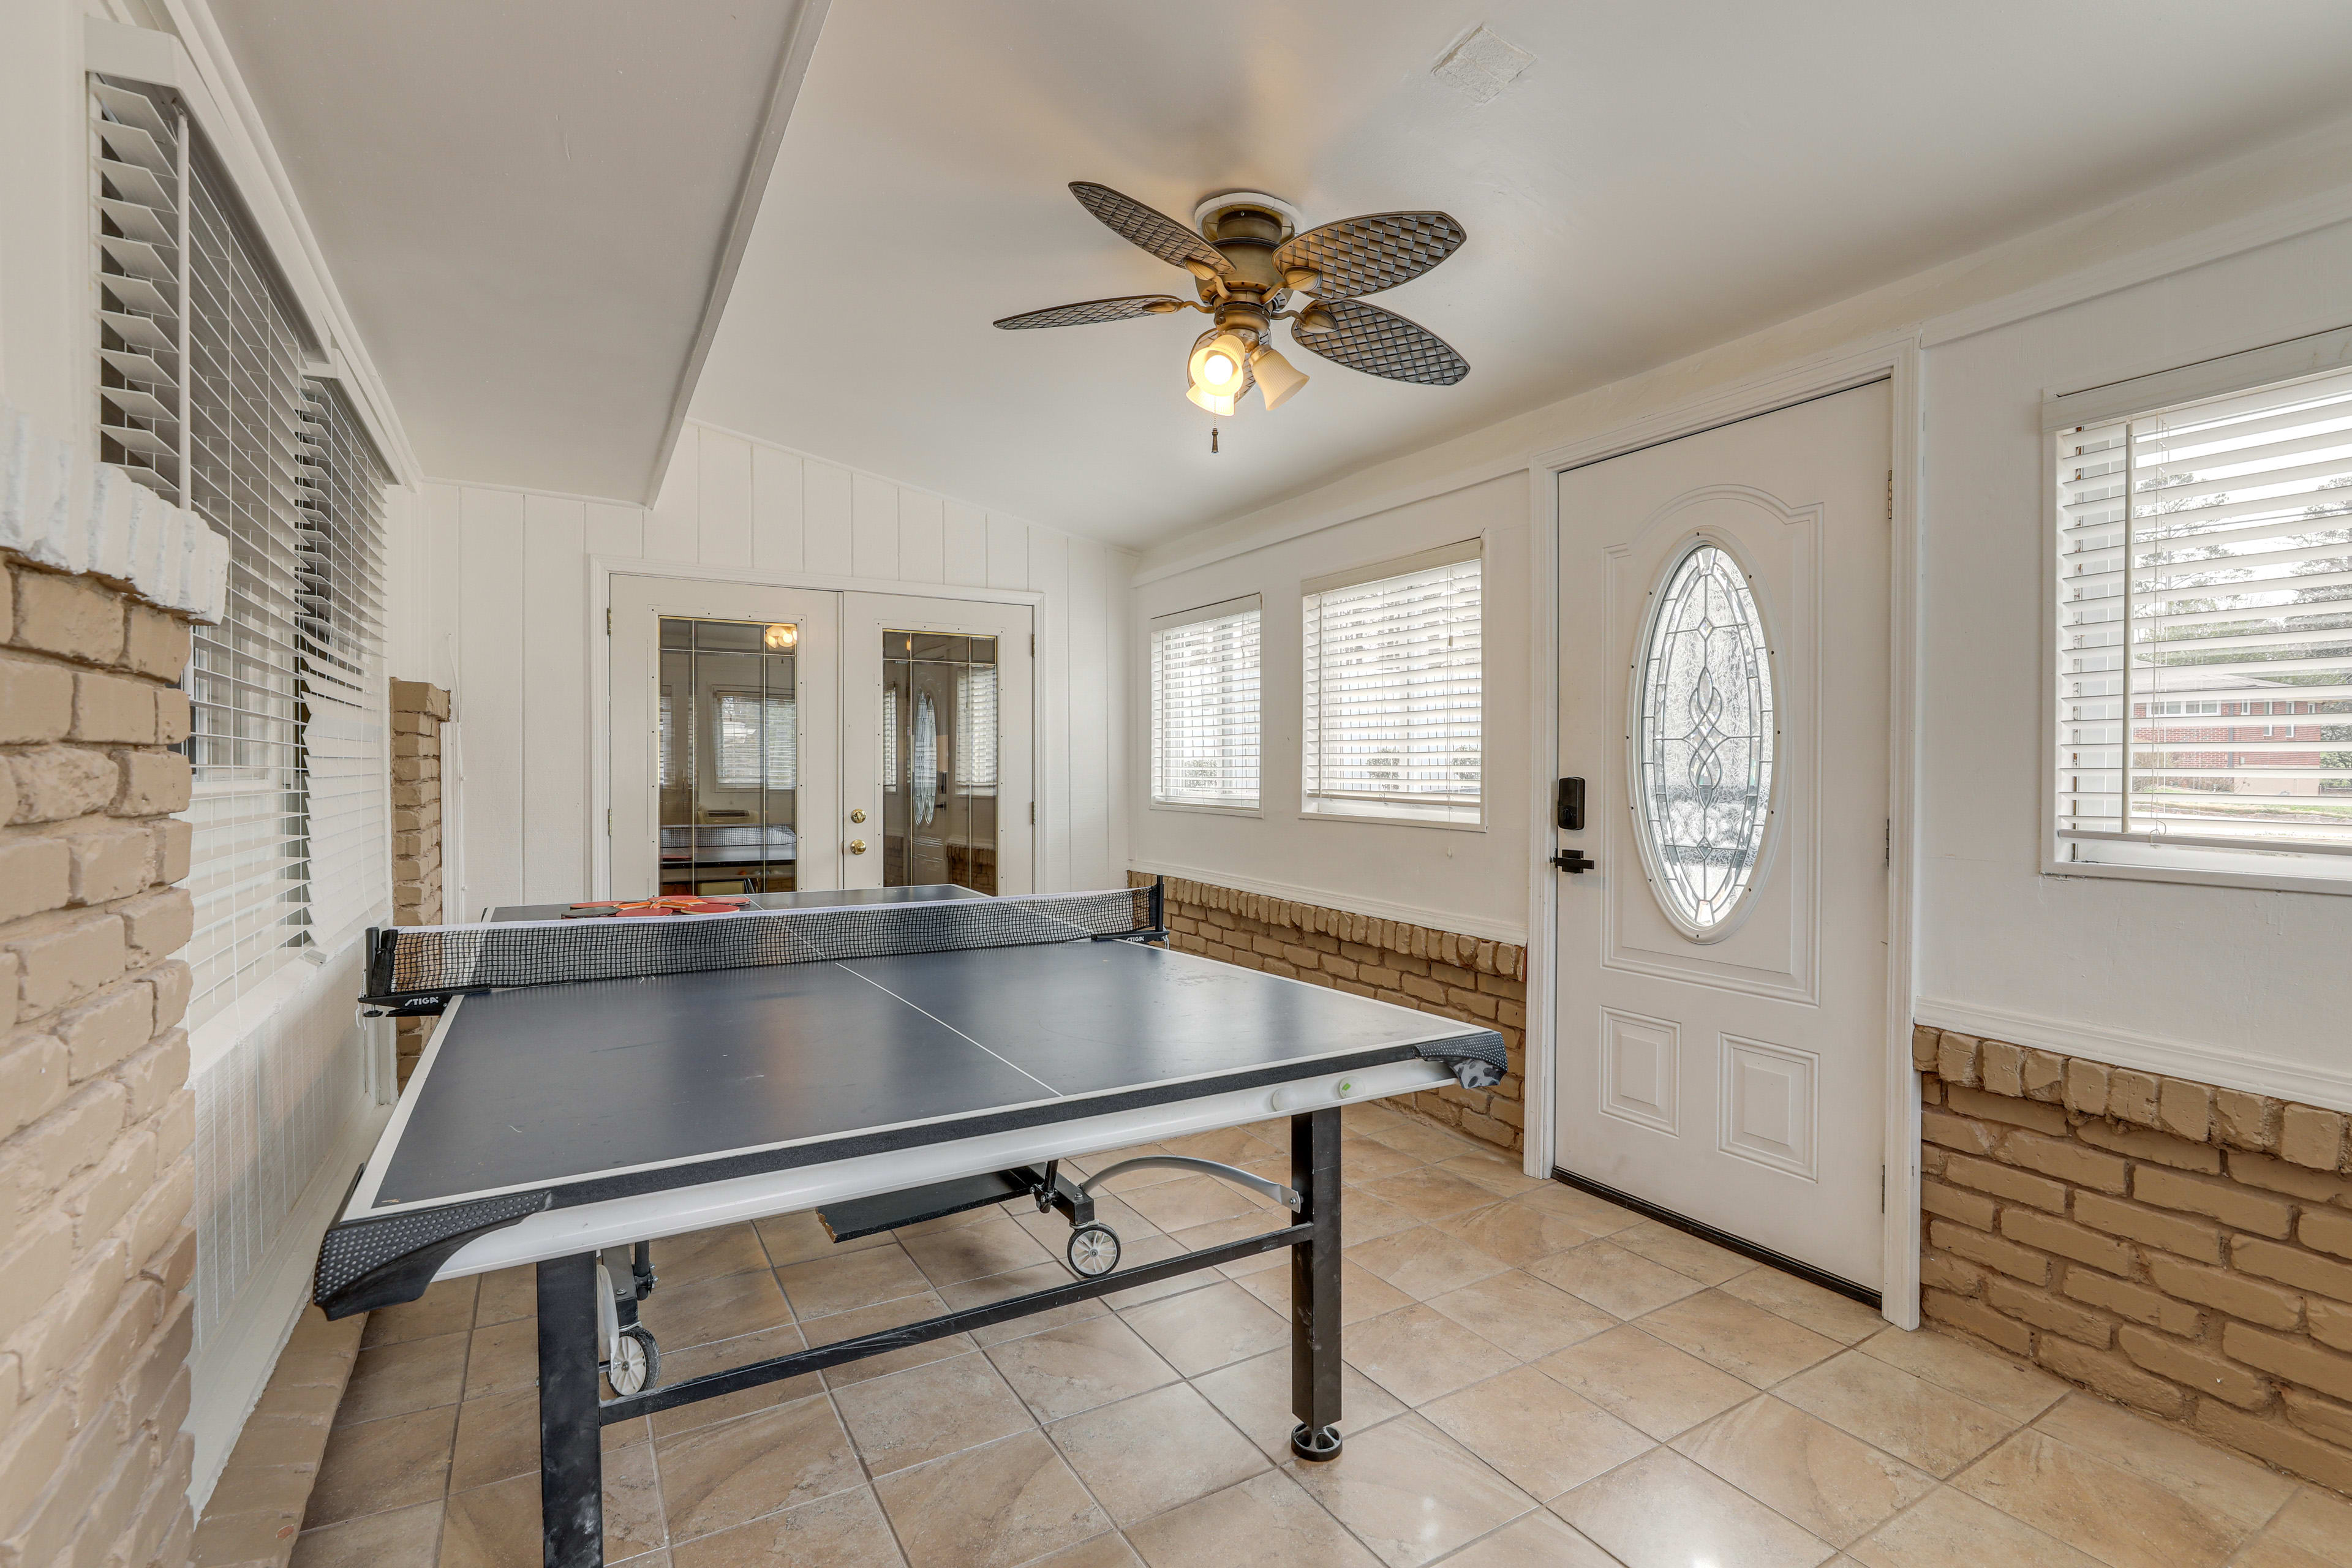 Game Room | Ping-Pong Table | Board Games